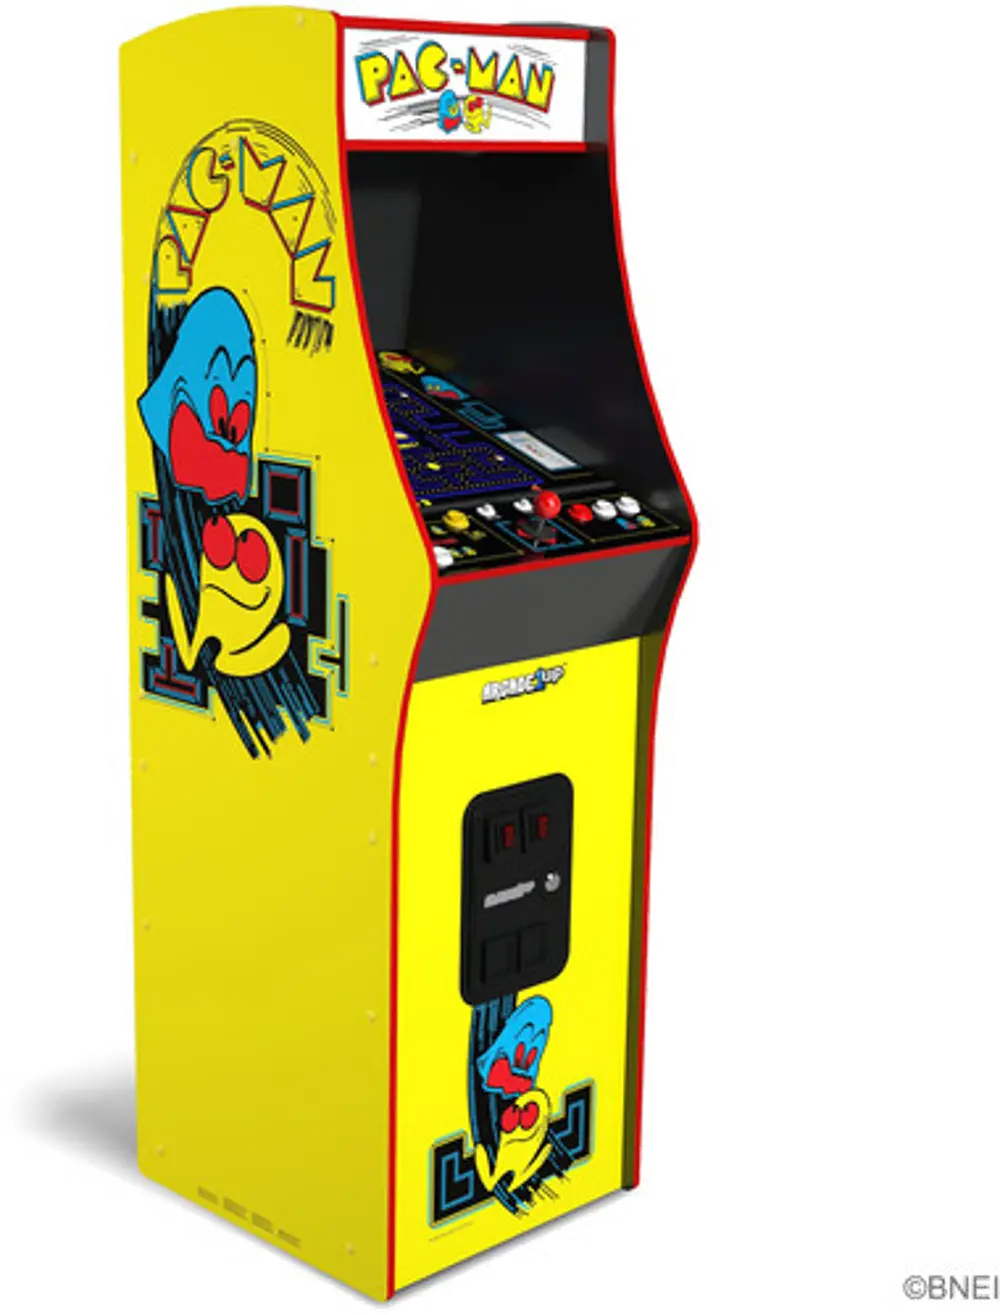 UPRIGHT/PACMAN_DLX Arcade1Up Pac-Man Deluxe Arcade Game-1